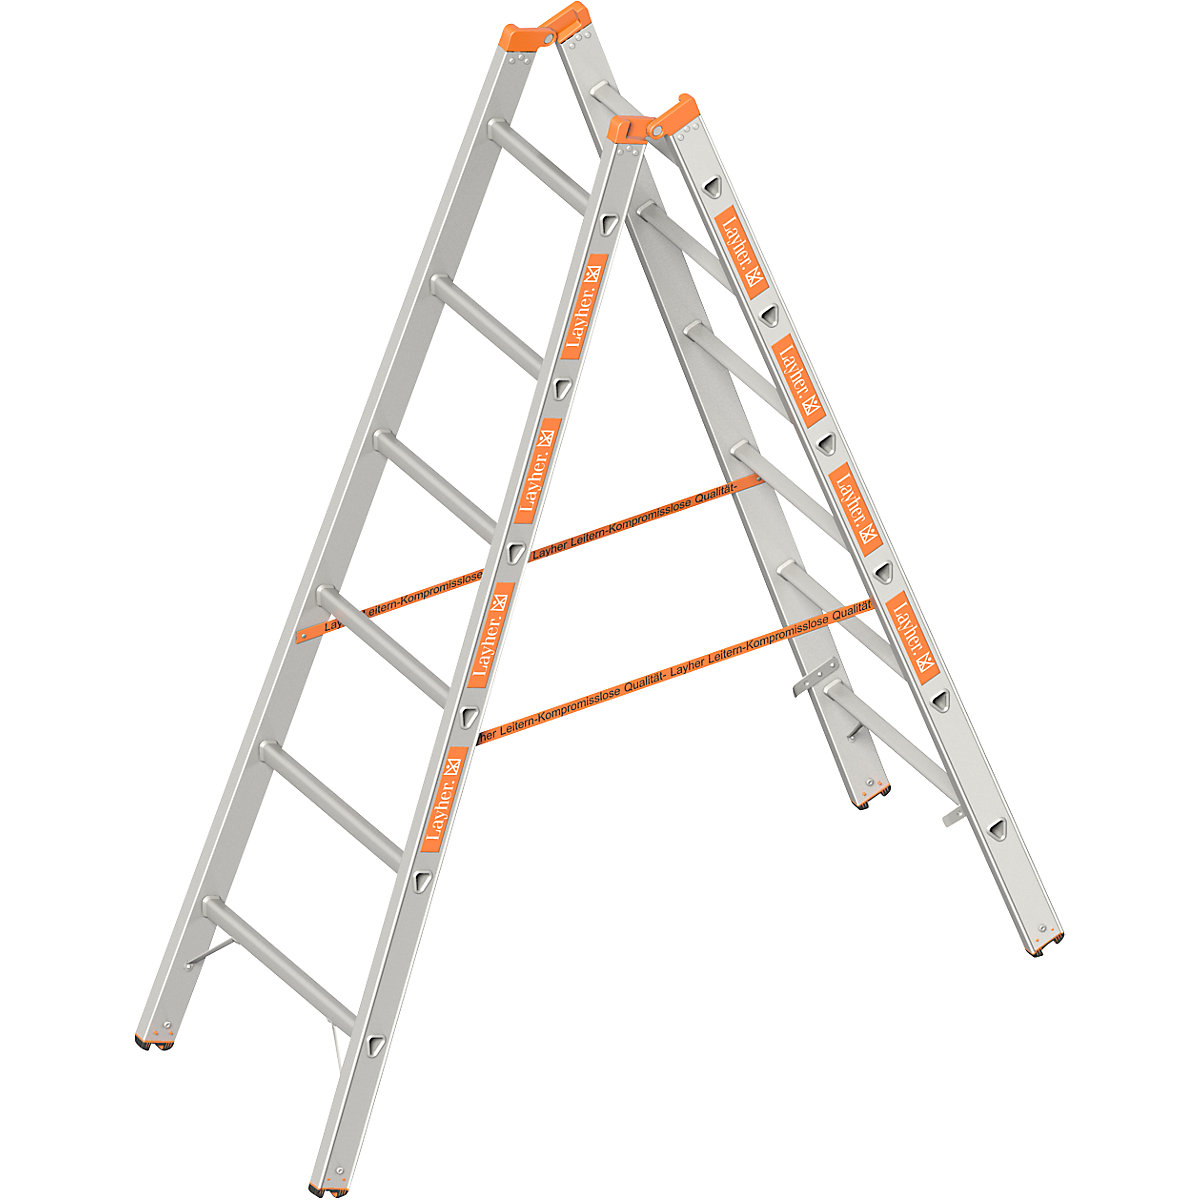 Double sided rung ladder – Layher, double sided access, 2 x 6 rungs-3